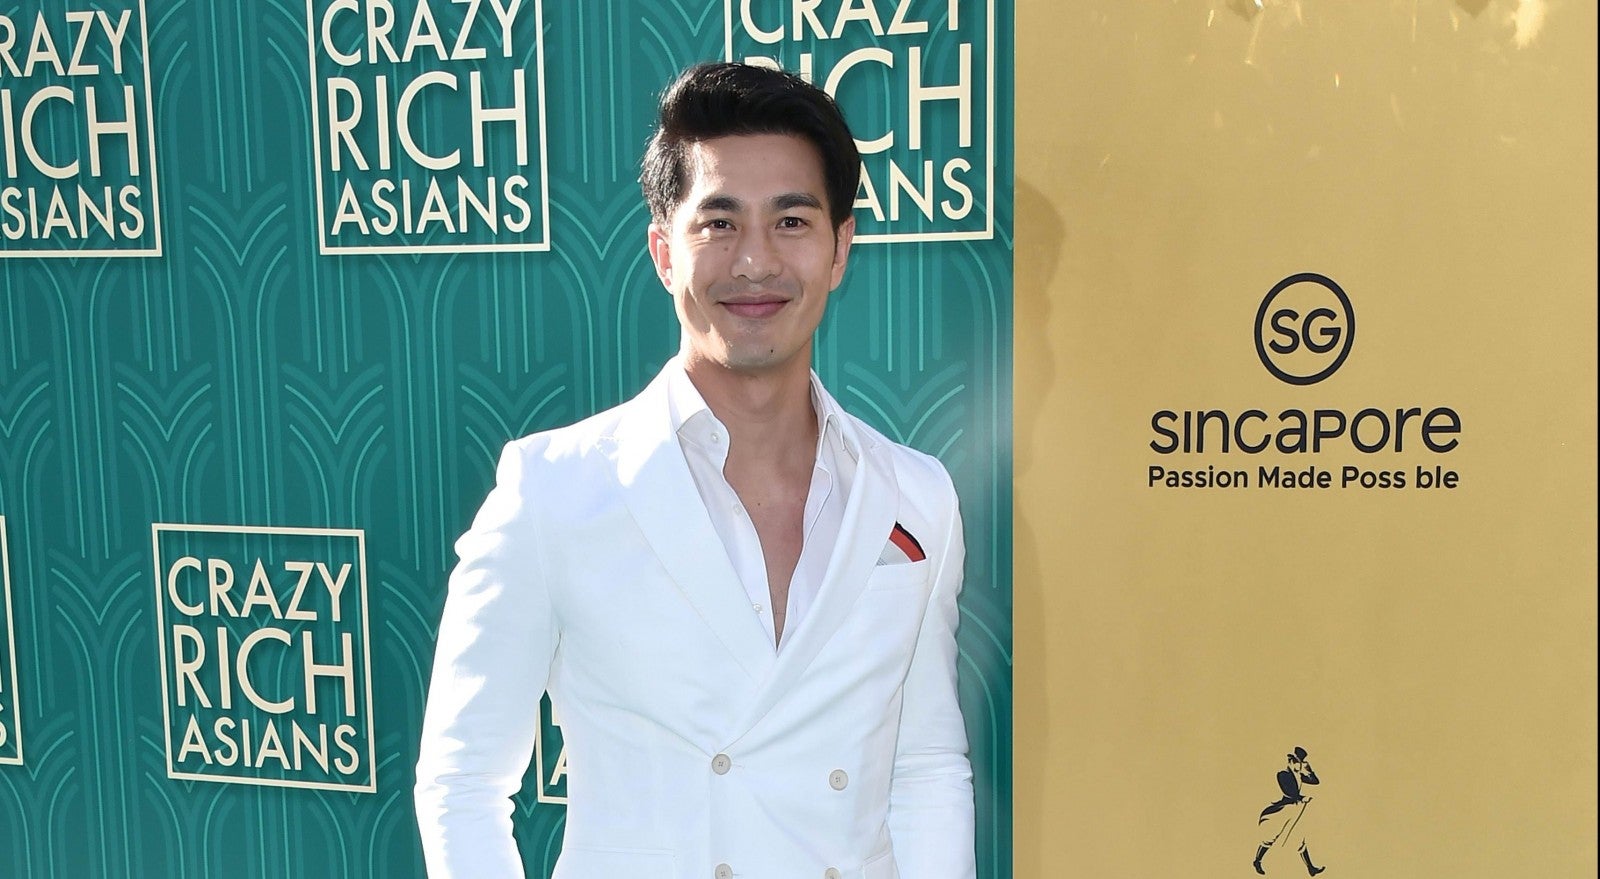 10 Hotties From 'Crazy Rich Asians' & Whether They're Still Single or Happily Taken - WORLD OF BUZZ 8